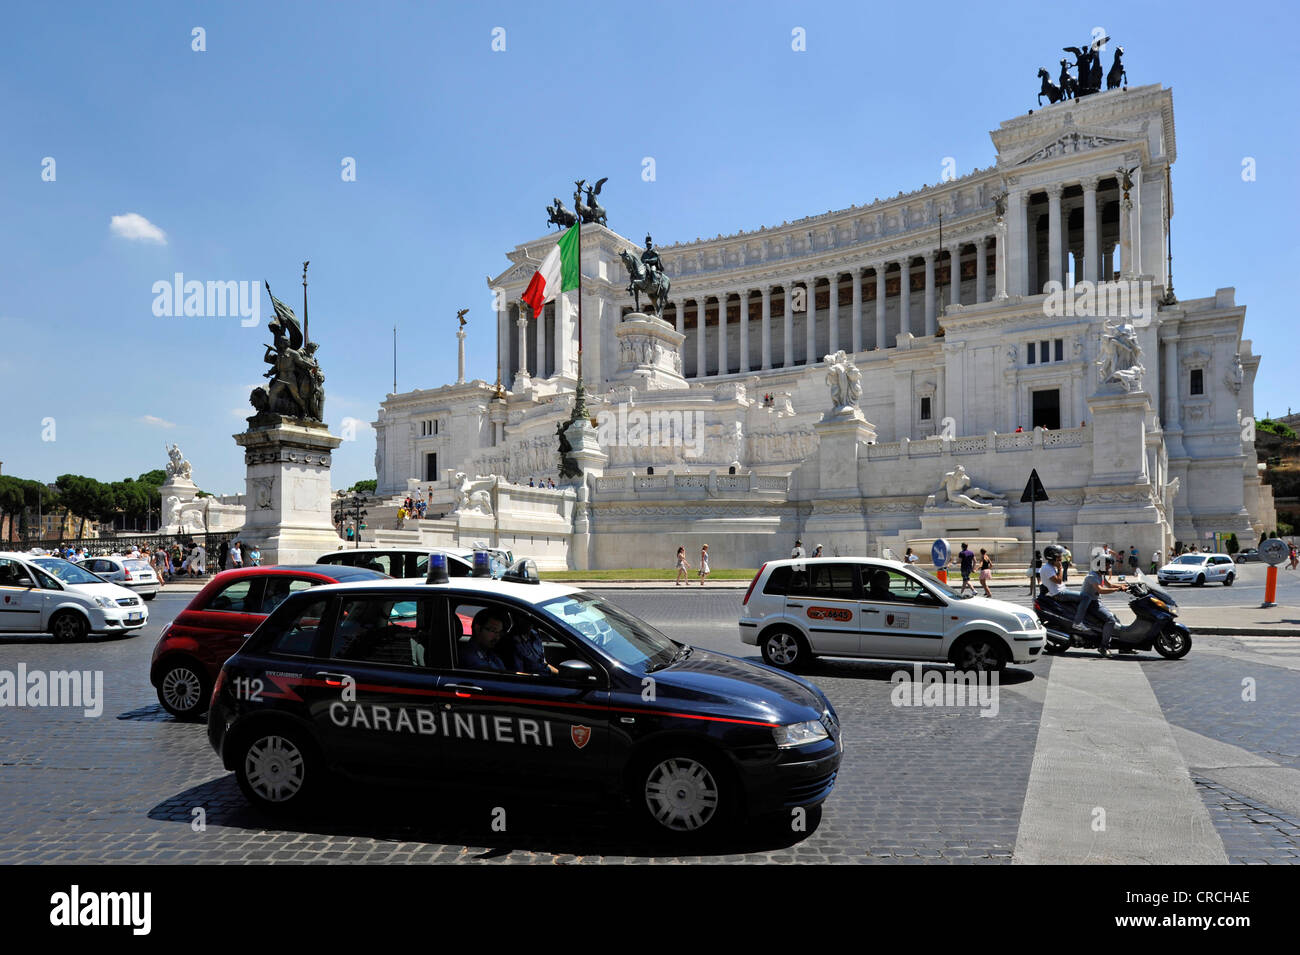 Traffic with a vehicle of the Carabinieri in front of the Italian National Monument to King Vittorio Emanuele II, Piazza Venezia Stock Photo